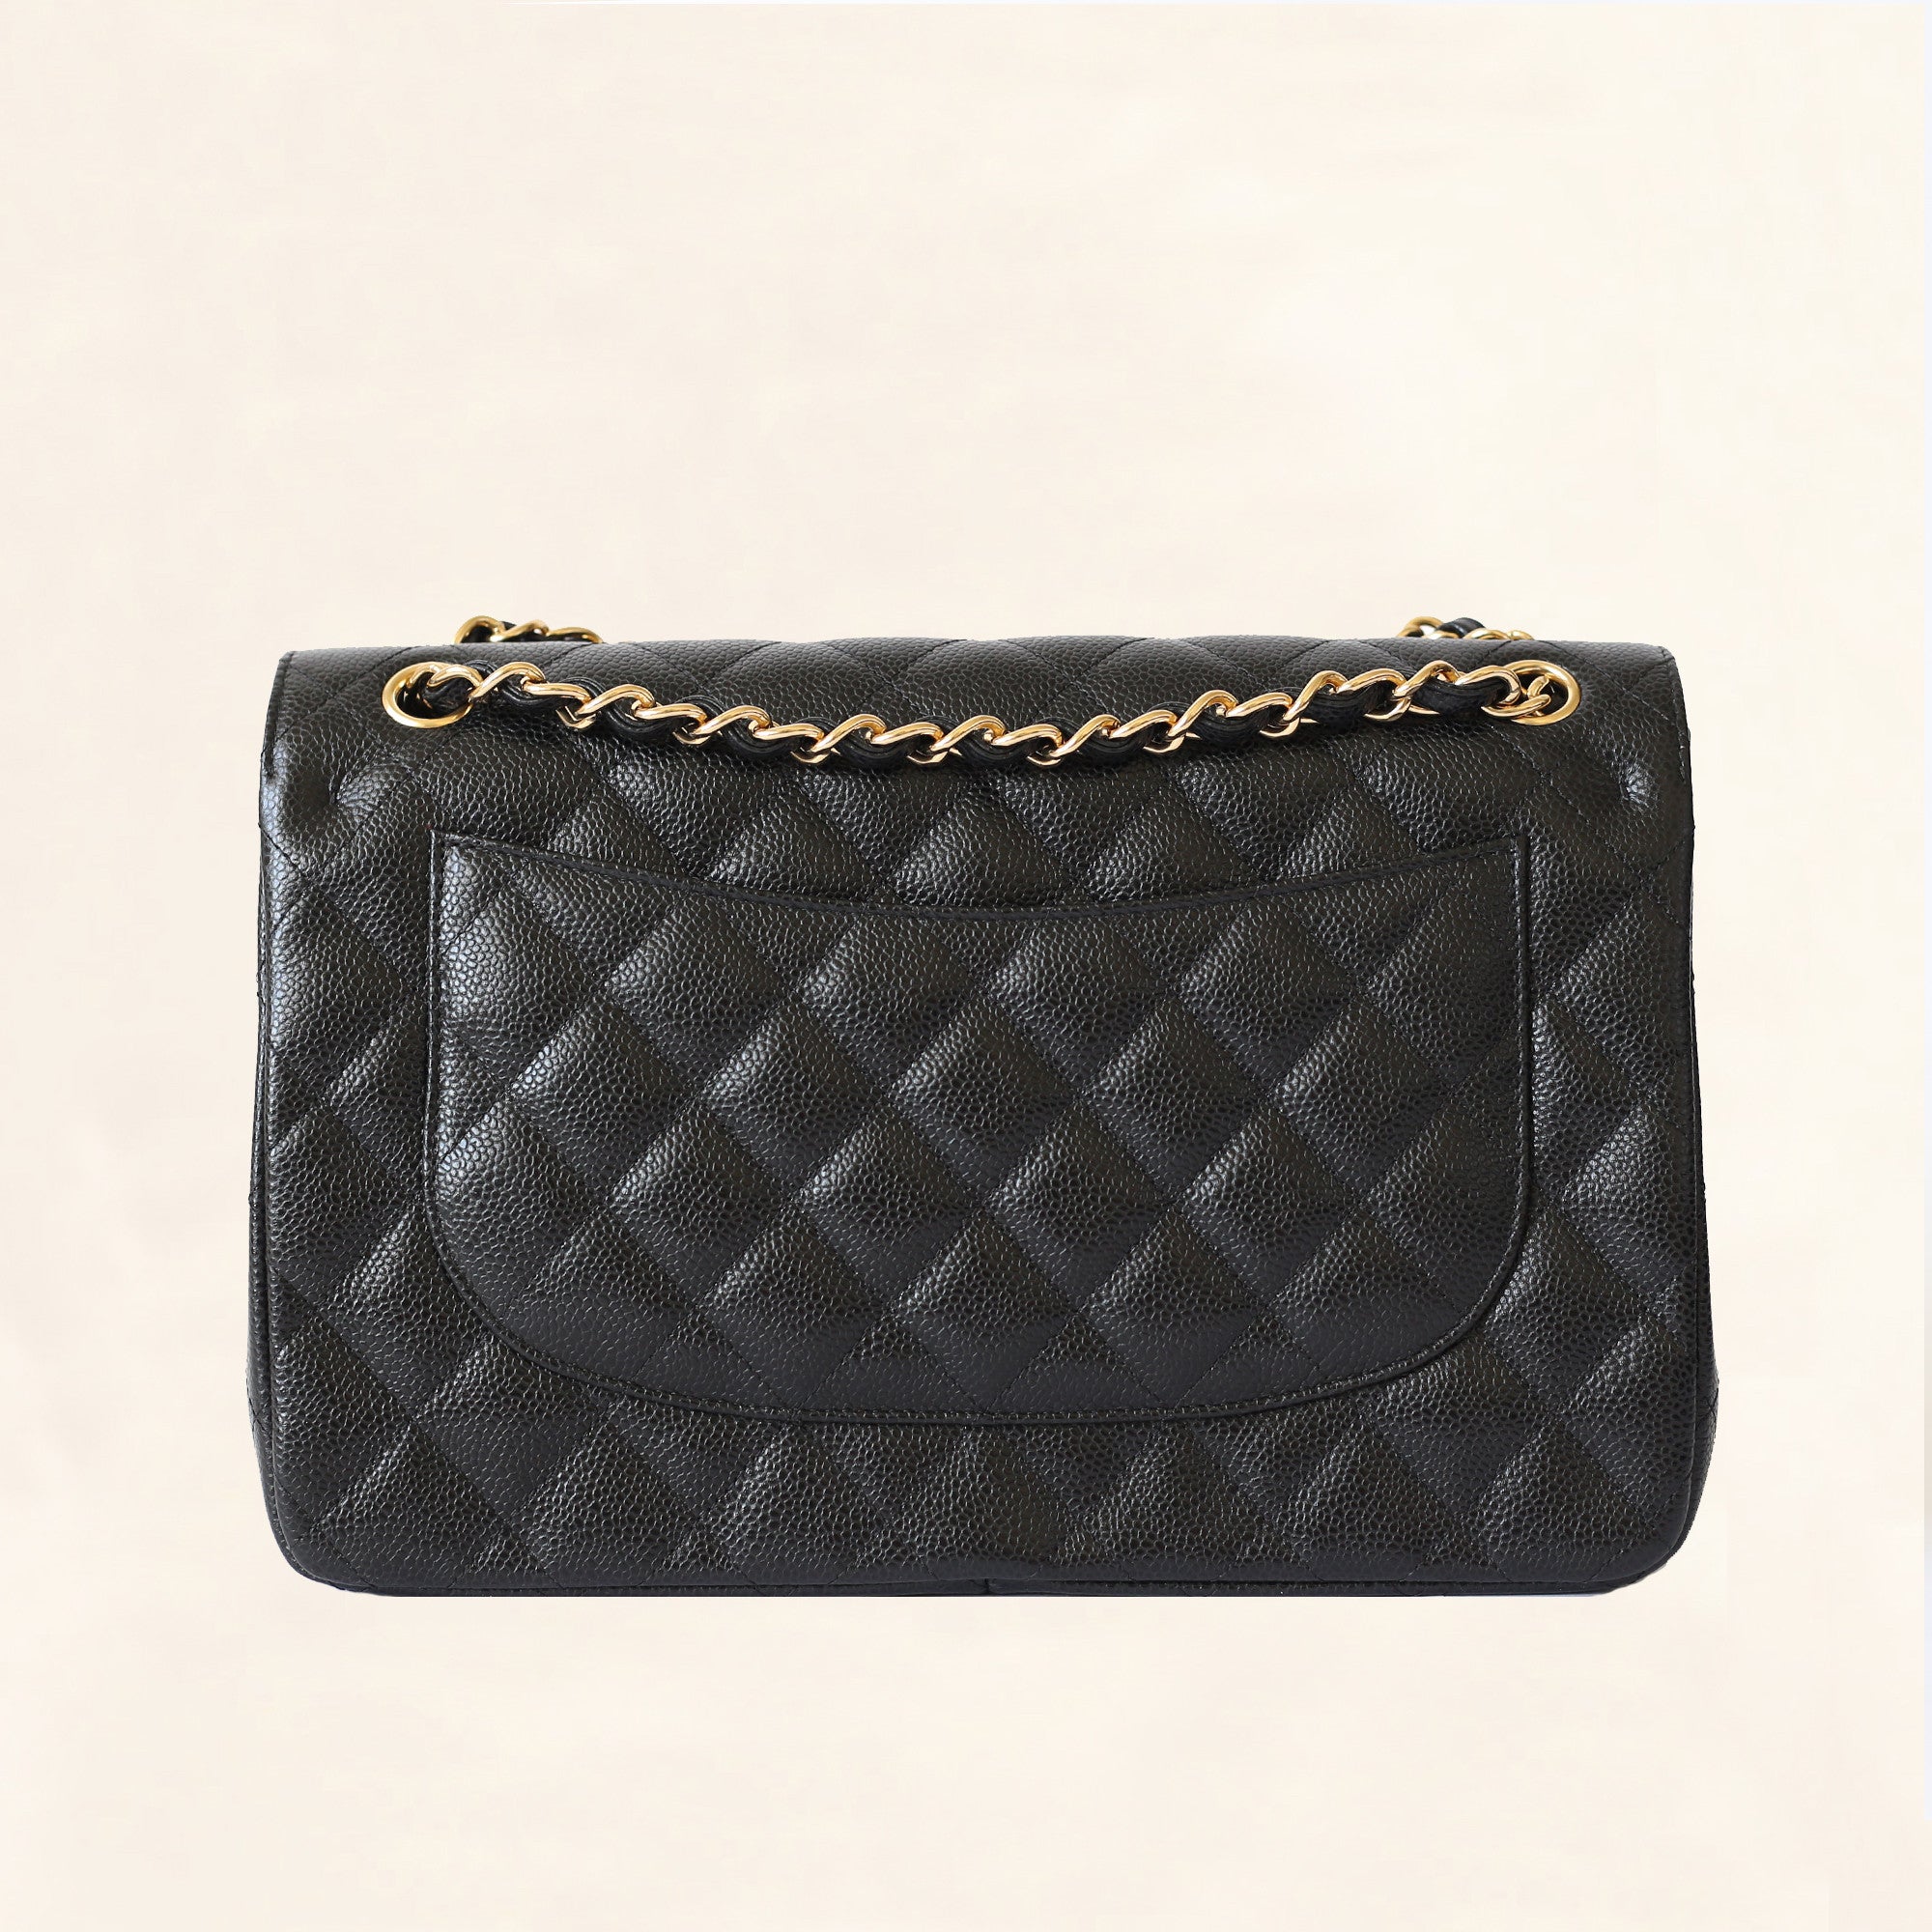 CHANEL Black Caviar Leather Gold Hardware Double Flap for Sale in Carlsbad,  CA - OfferUp